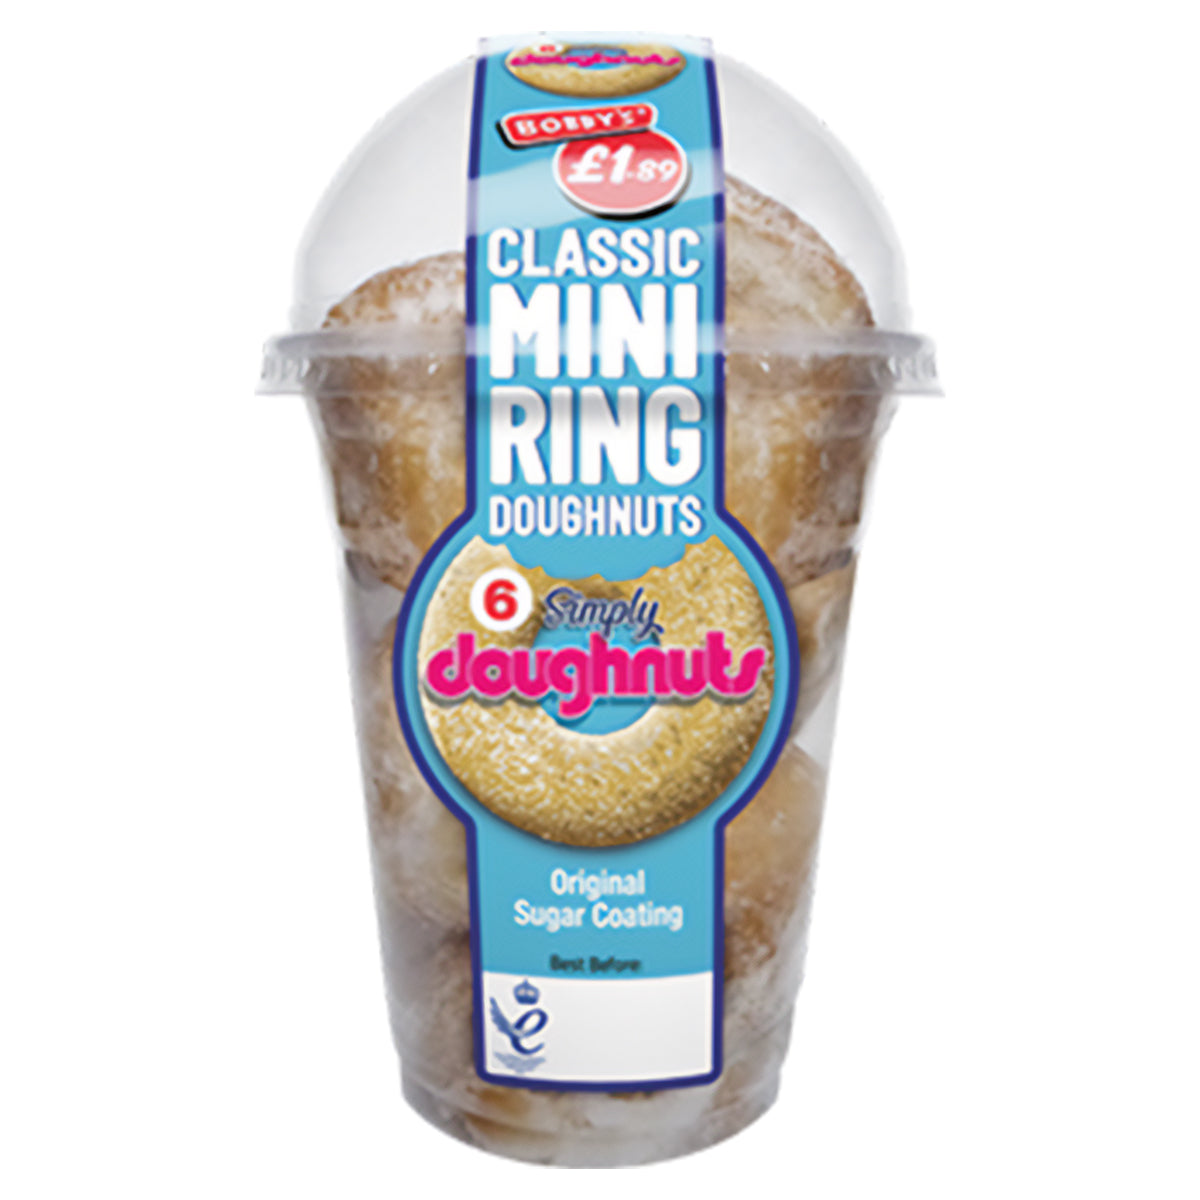 A cup of Bobbys - Mini Doughnuts - 6 Pack in a plastic container.